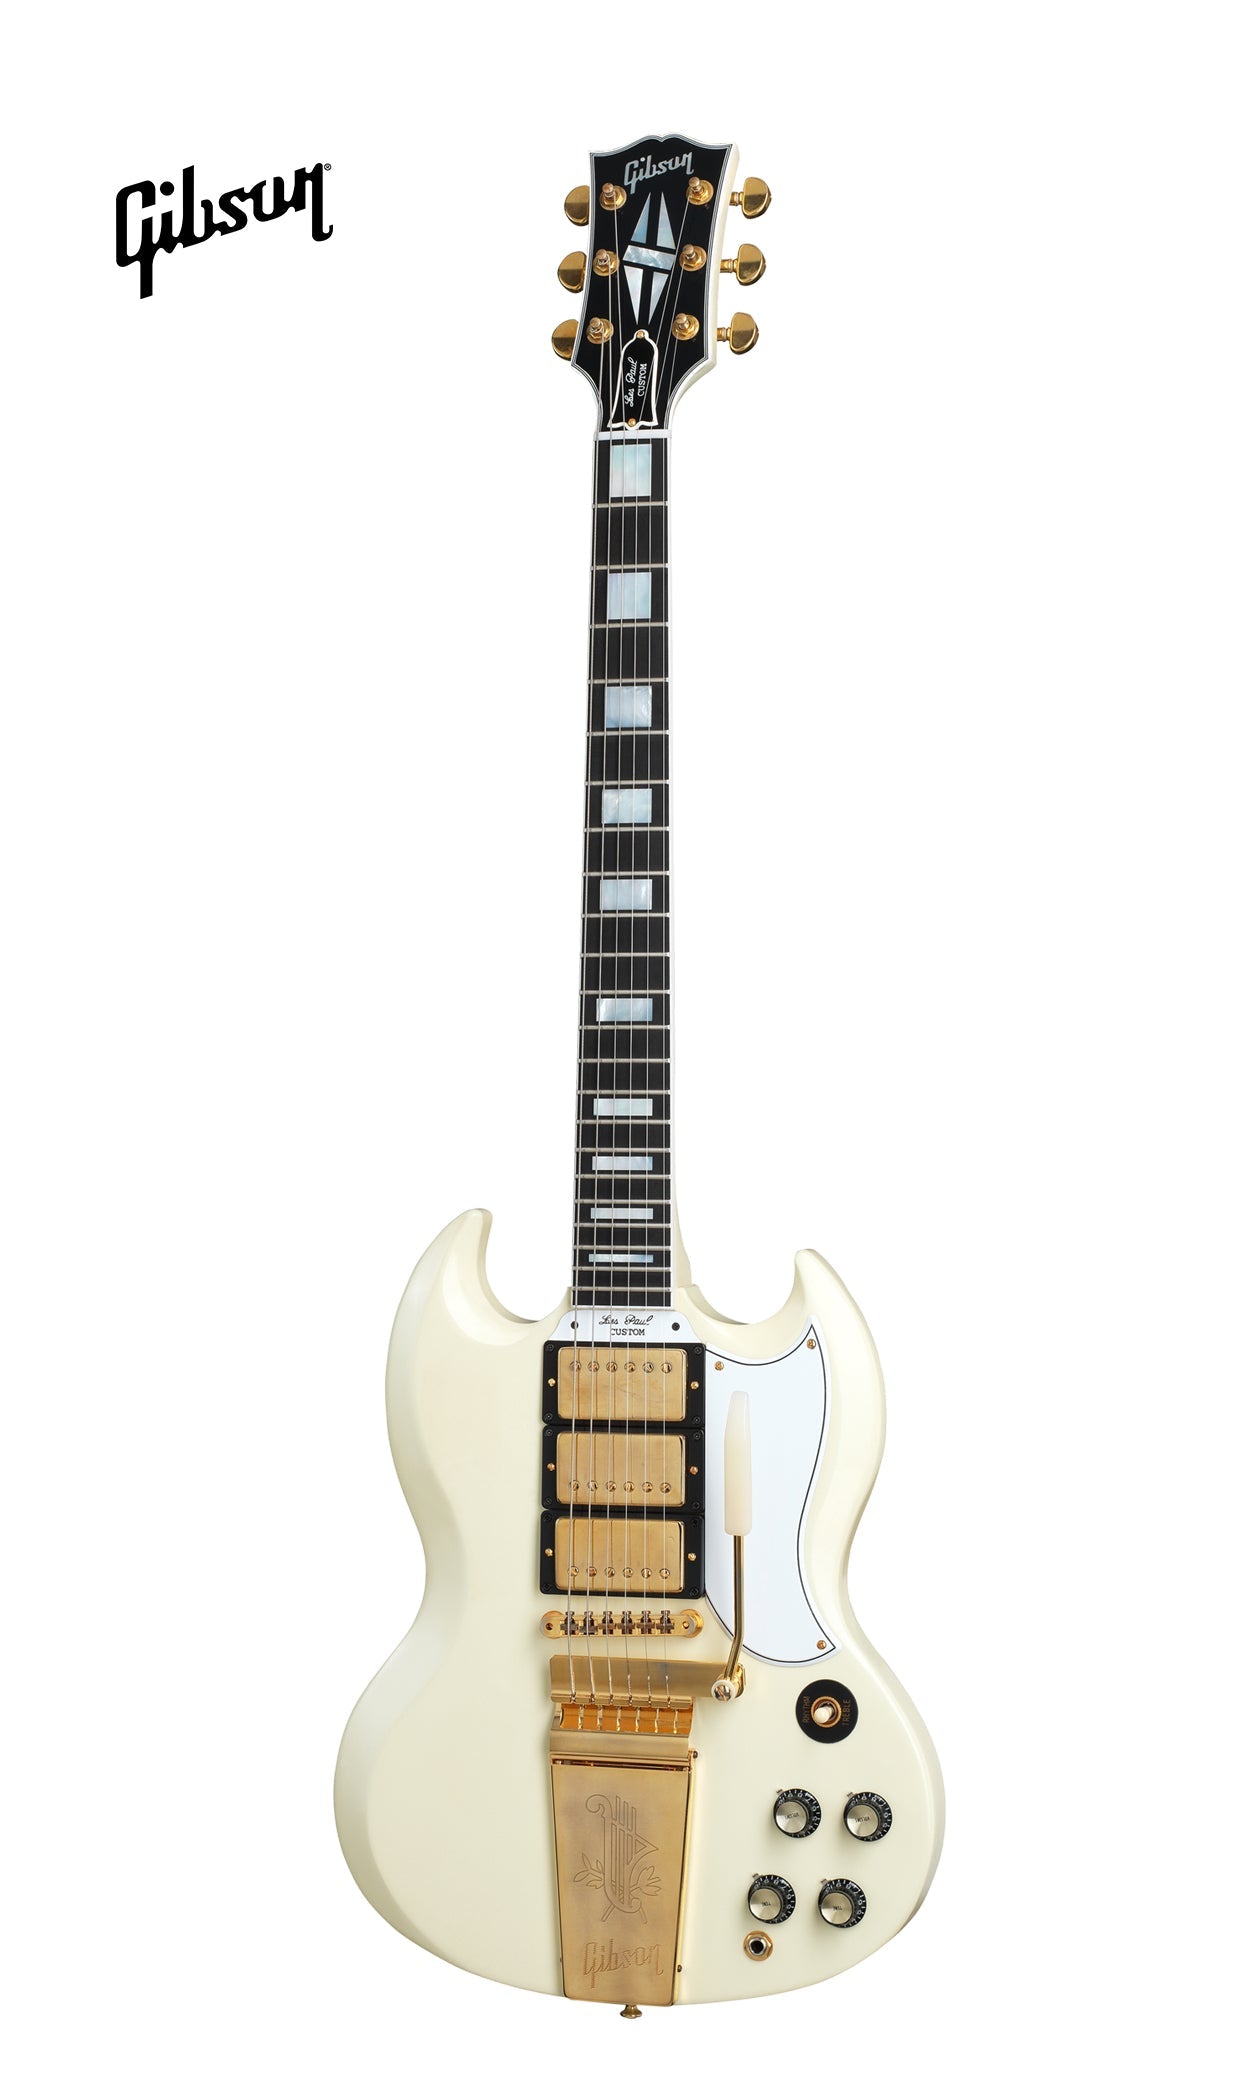 GIBSON 1963 LES PAUL SG CUSTOM REISSUE 3-PICKUP WITH MAESTRO VIBROLA VOS ELECTRIC GUITAR - CLASSIC WHITE